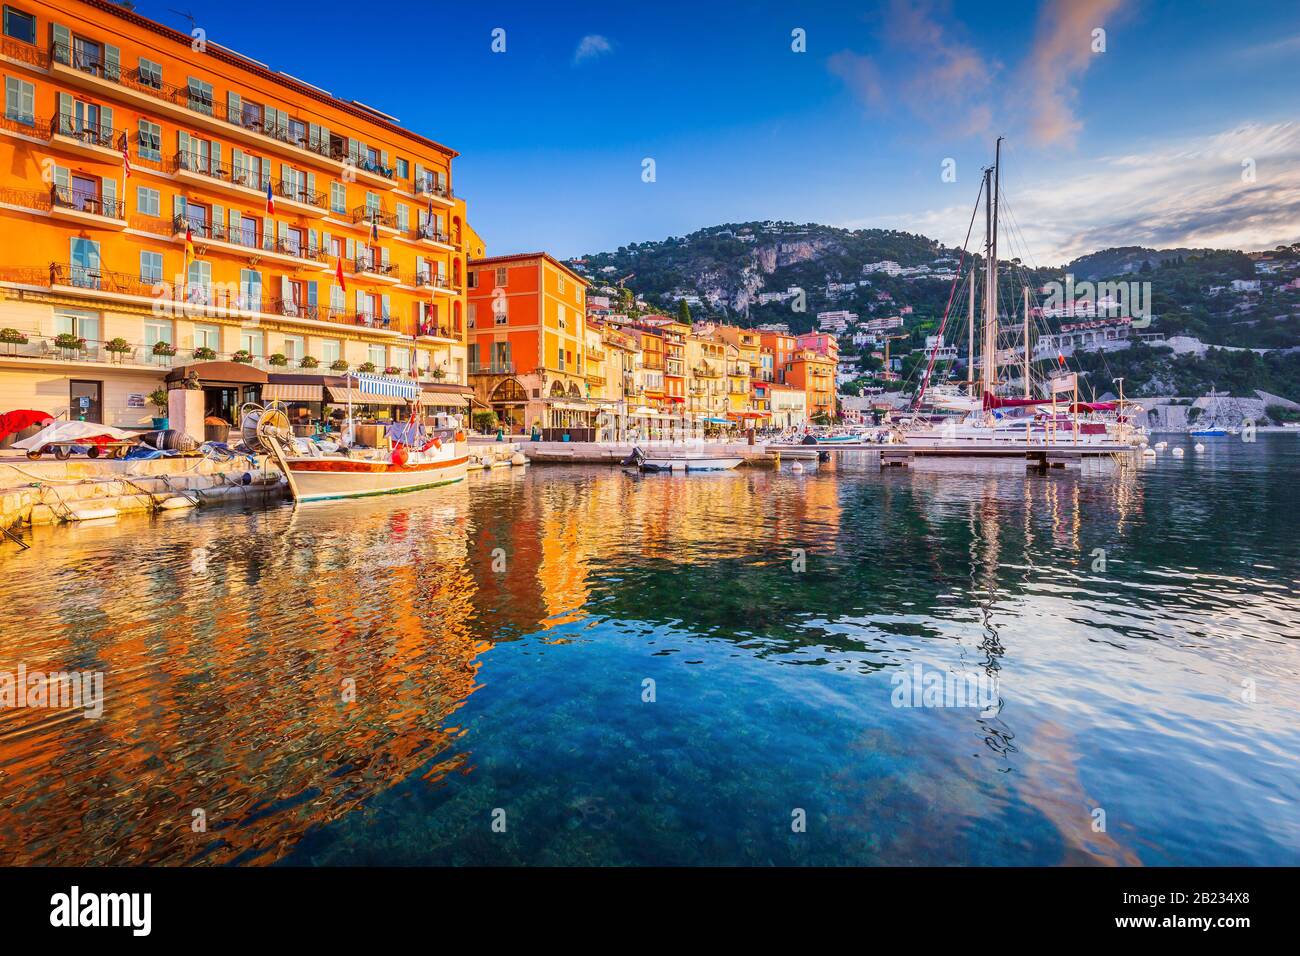 Villefranche sur Mer, France. Seaside town on the French Riviera or Cote d'Azur. Stock Photo